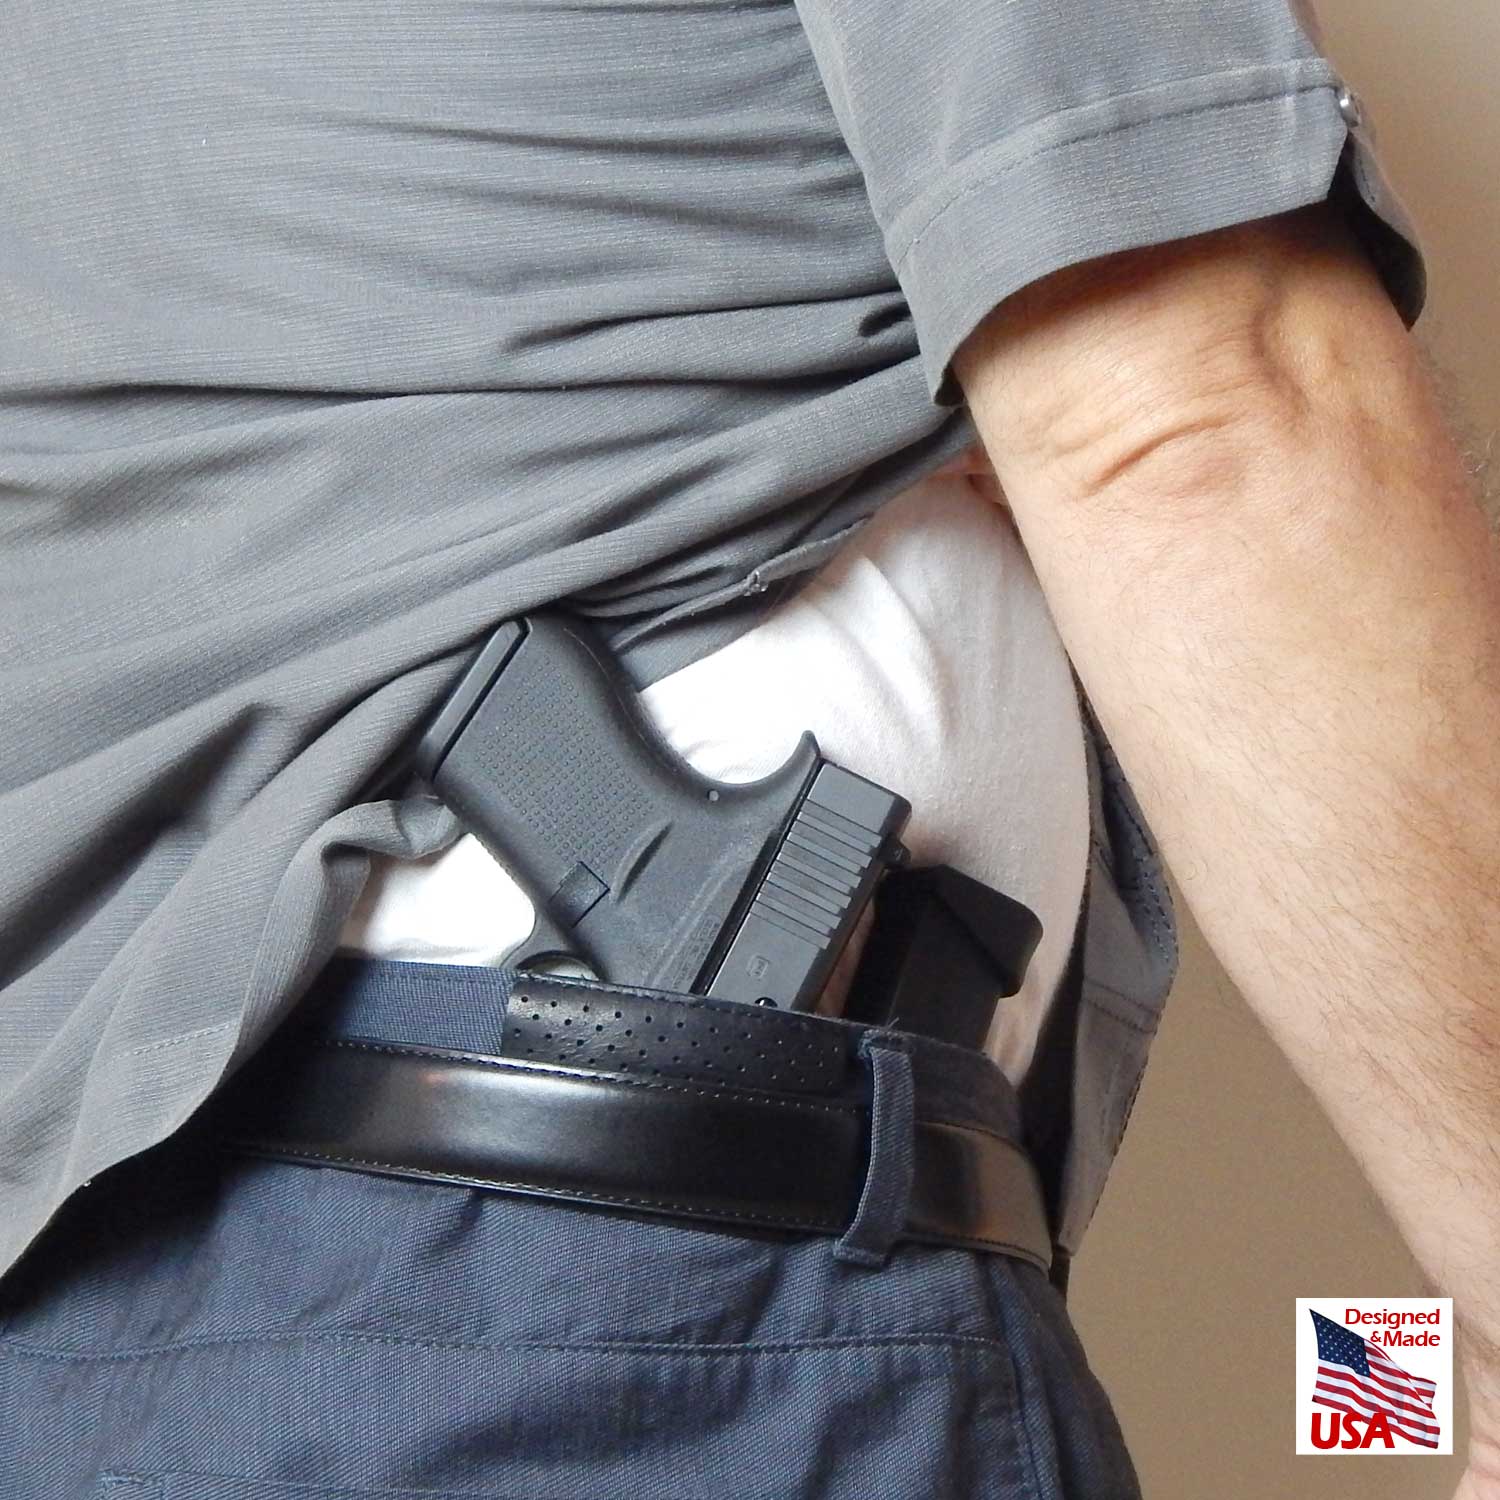 NEW Details about   Ghost Concealment Lg Belly Band Holster for Concealed Carry Fits up to 54" 